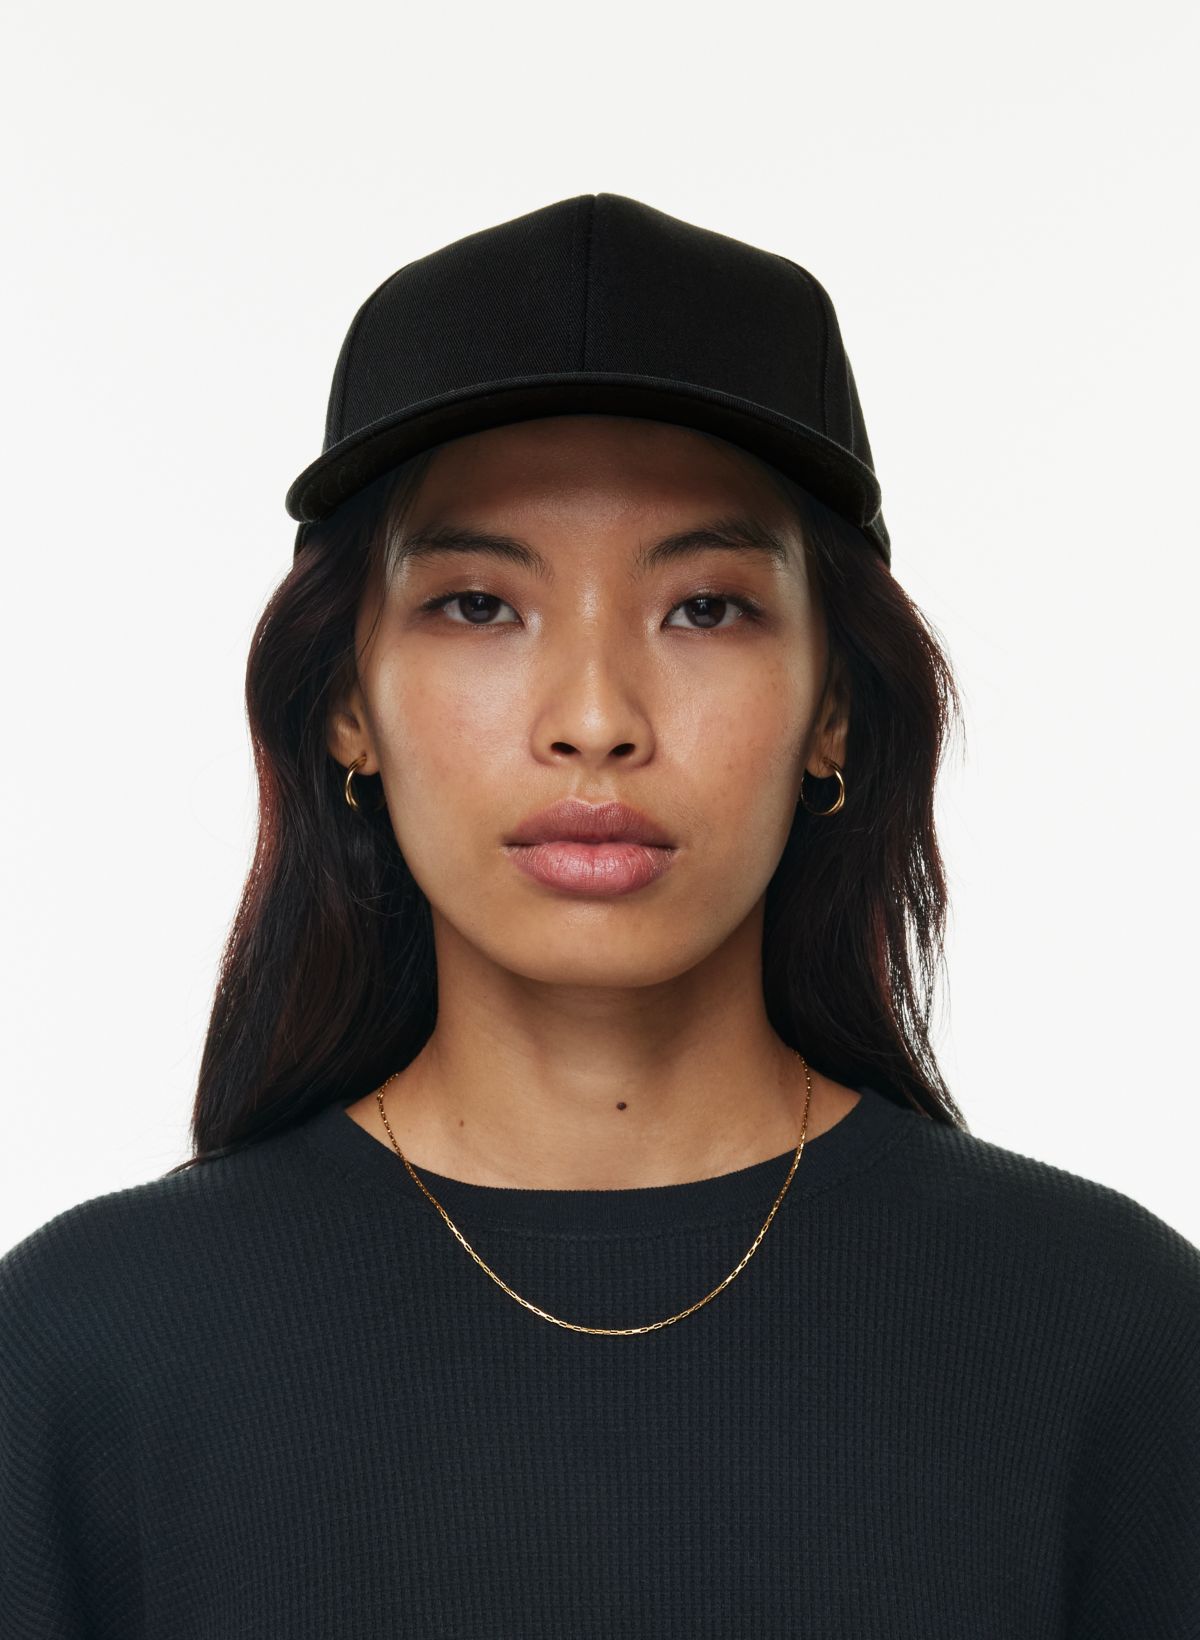 Caps T-shirt Boxy Fit in Black